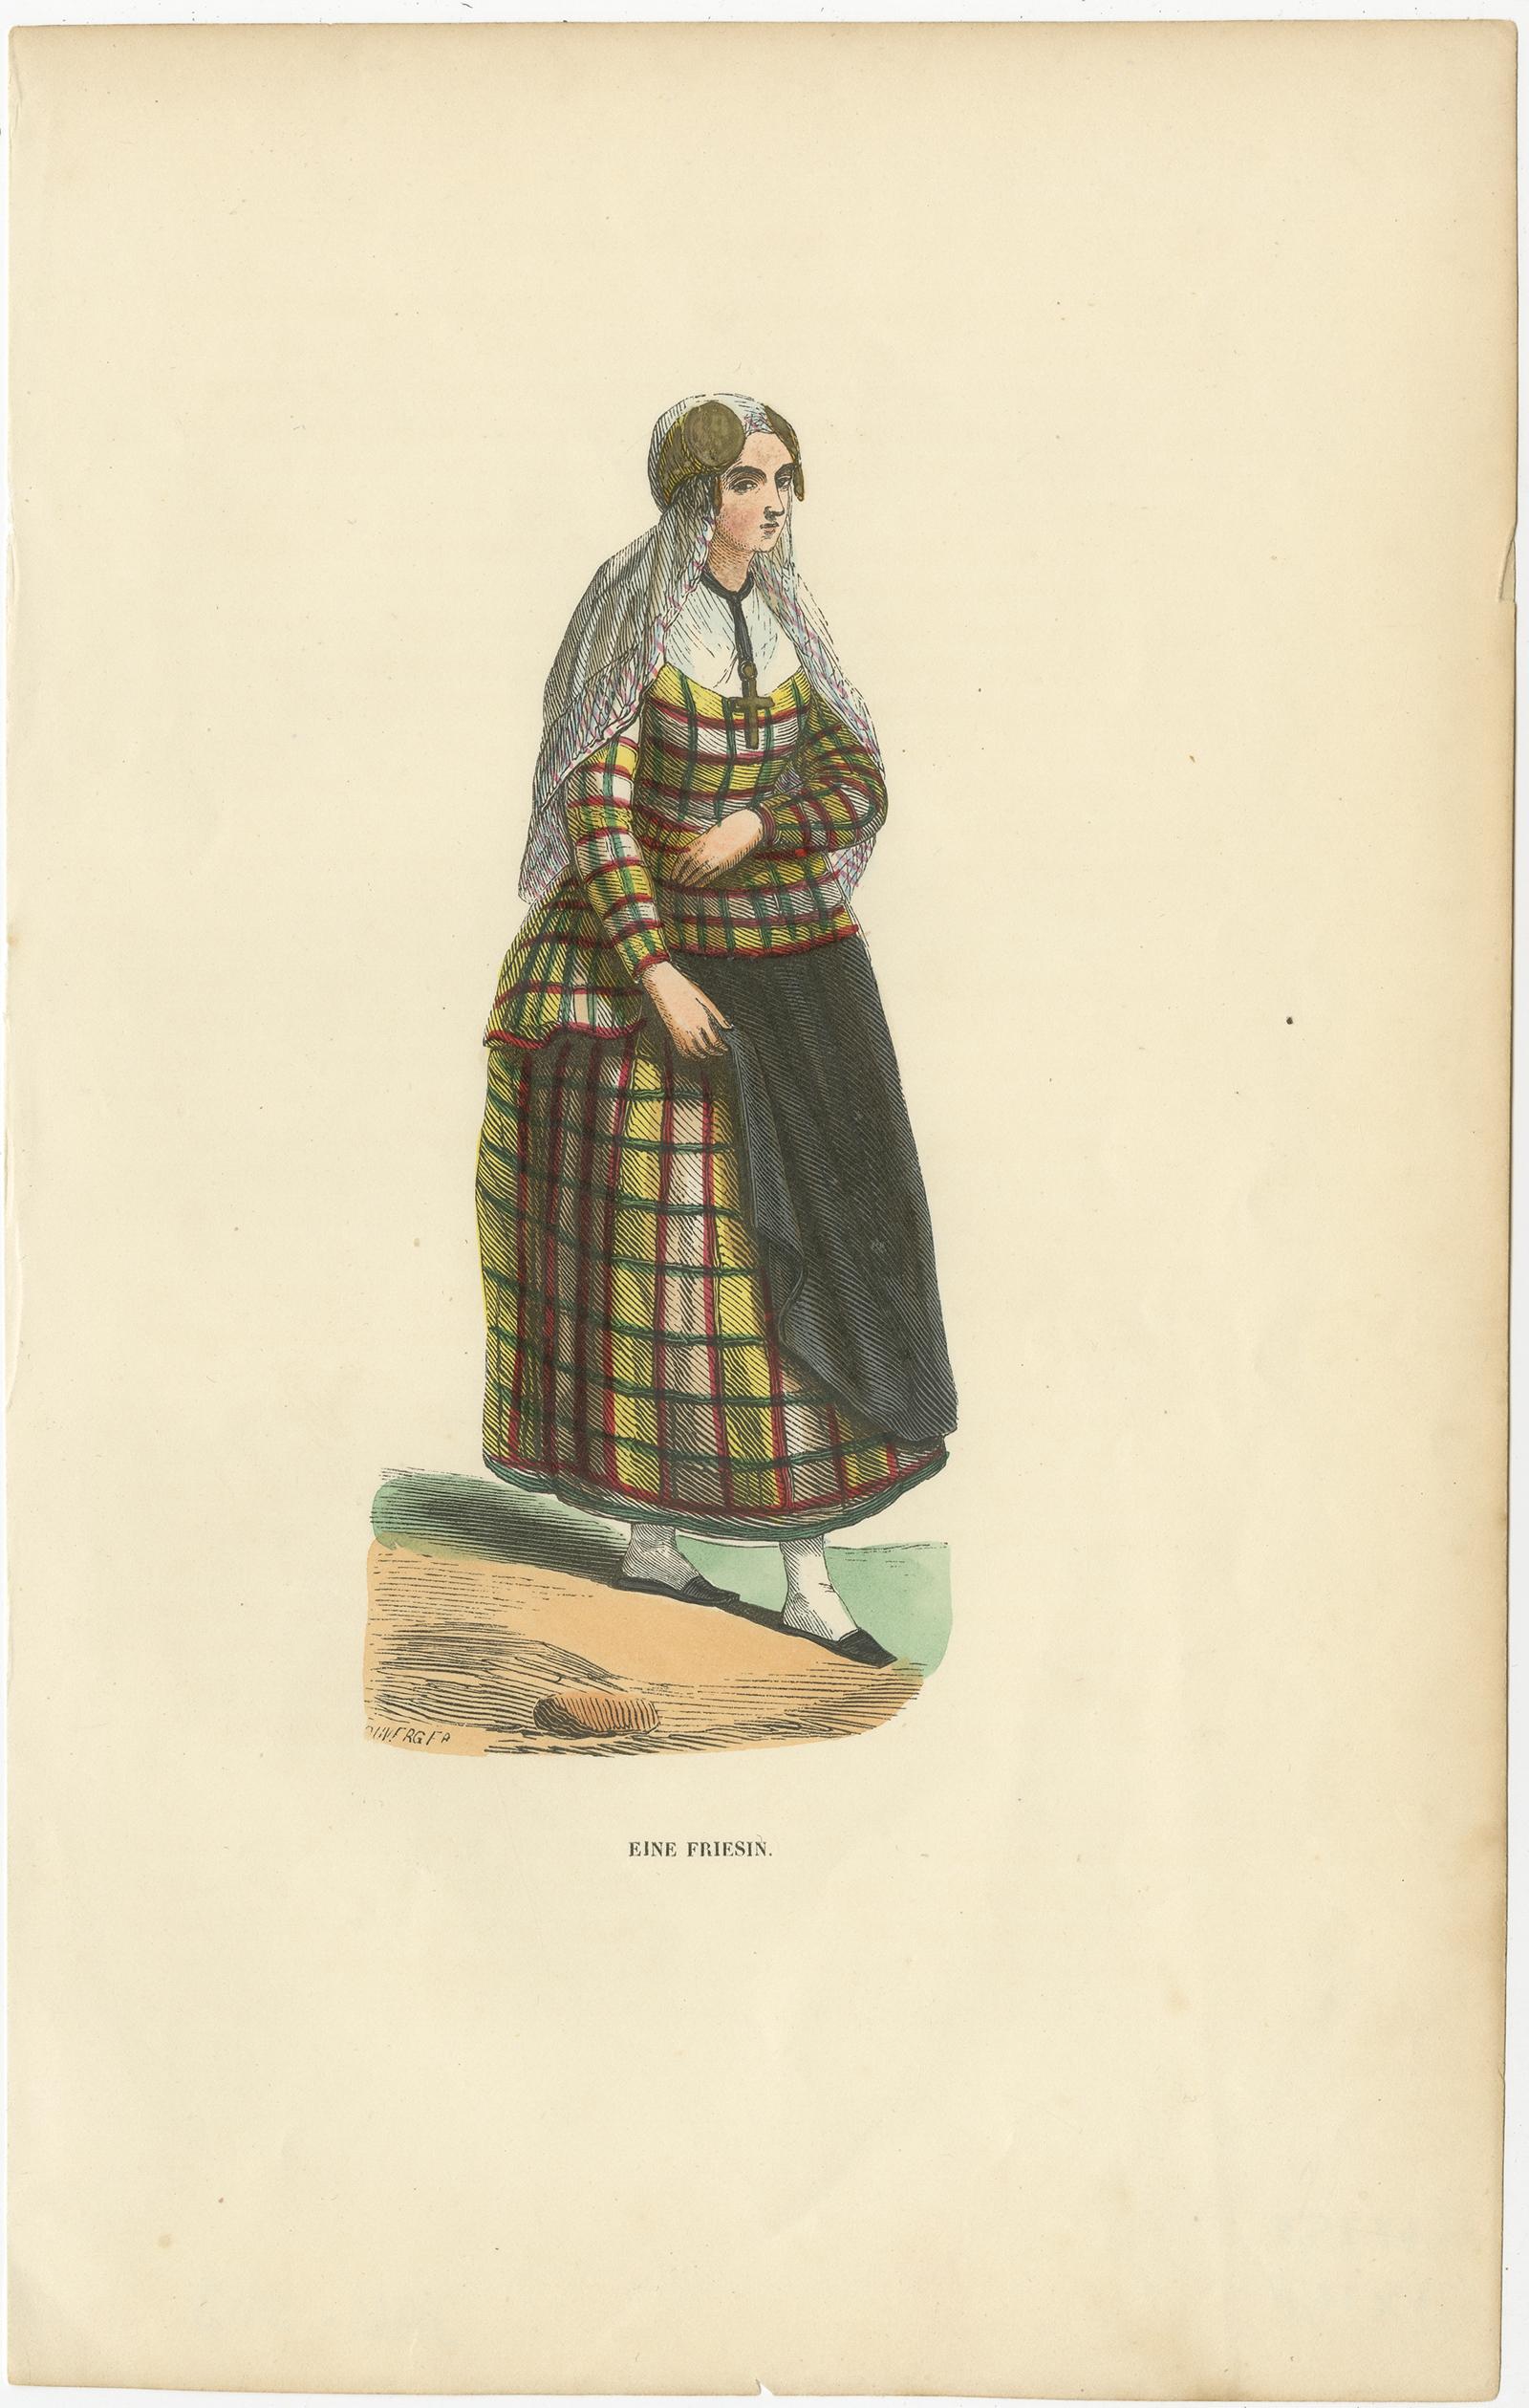 Antique print titled 'Eine Friesin'. Lithograph of a woman from Friesland, perhaps Ostfriesland. Source unknown, to be determined.

Artists and Engravers: Anonymous.

Condition:
Good, general age-related toning. Minor wear, blank verso. Please